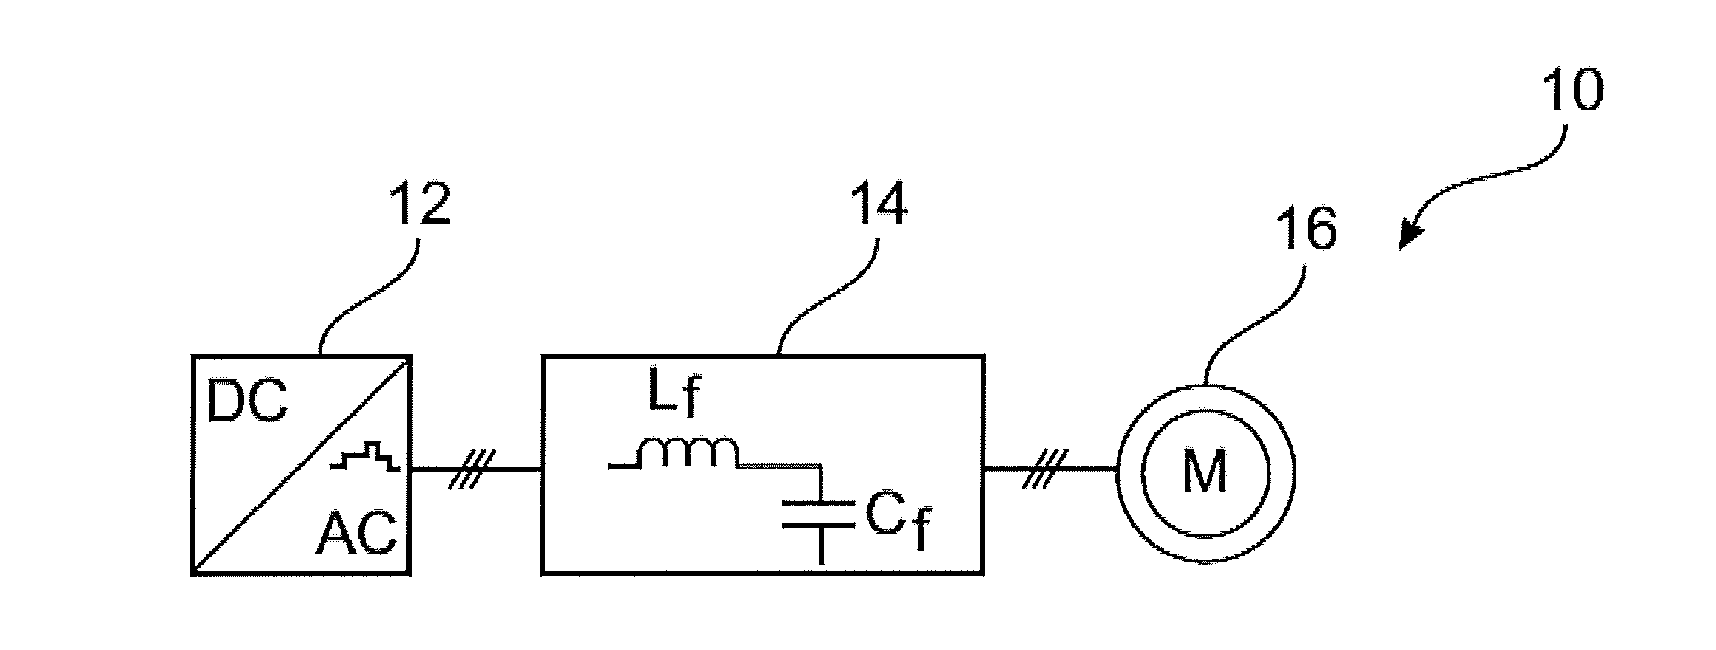 Control method for electrical converter with lc filter